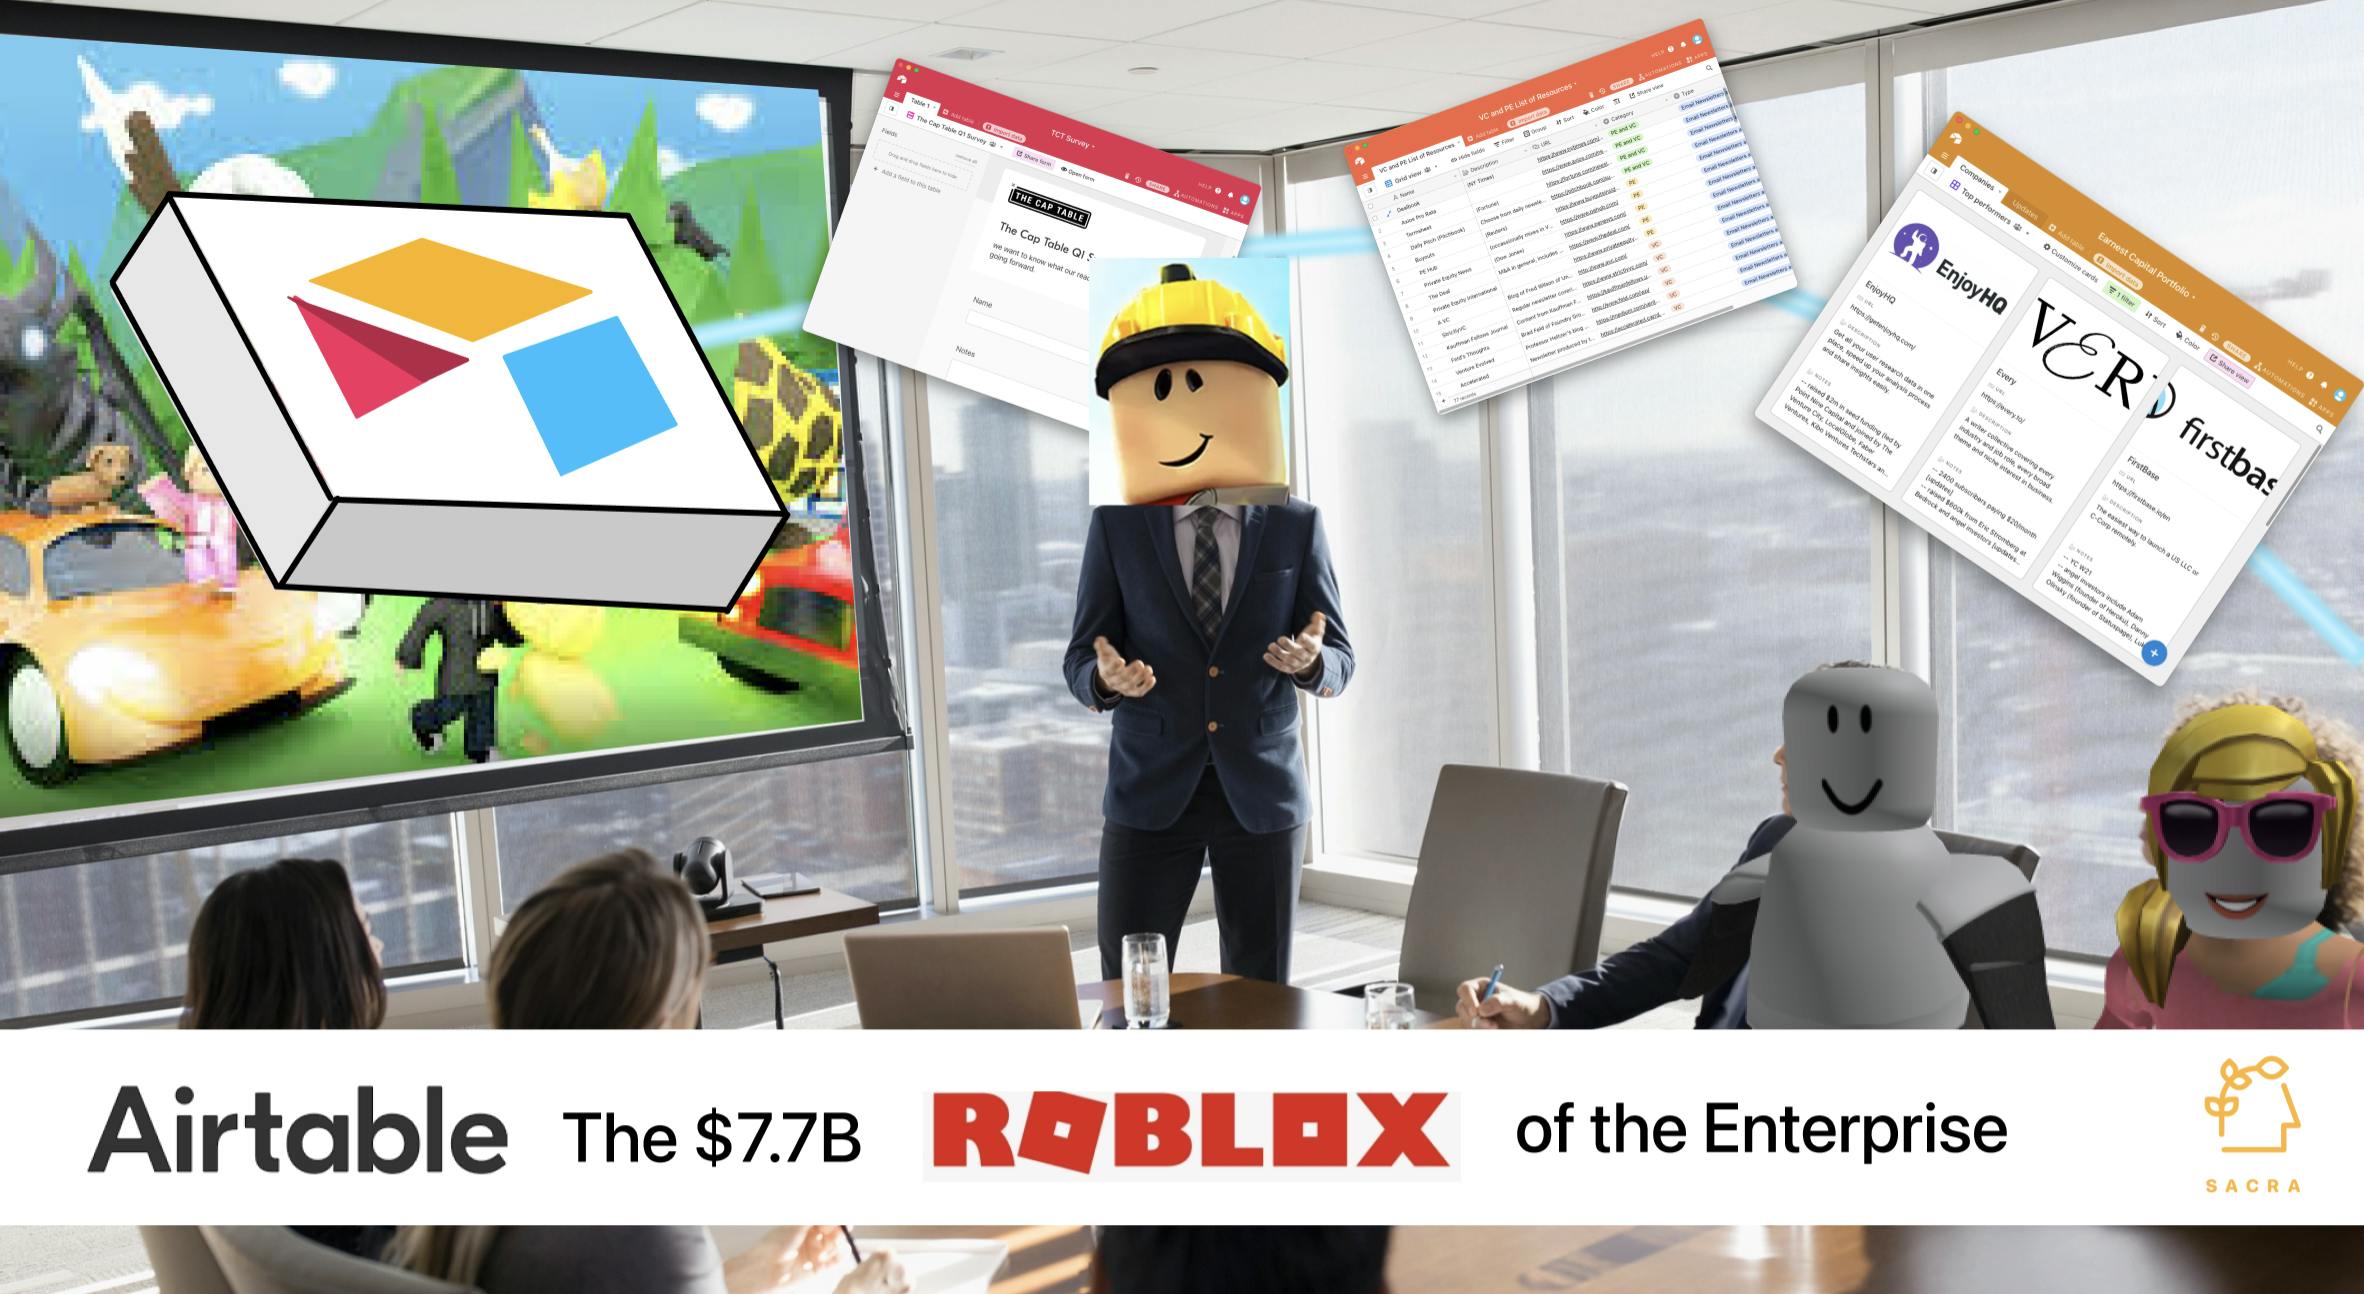 Roblox Gambling Site UI designs, themes, templates and